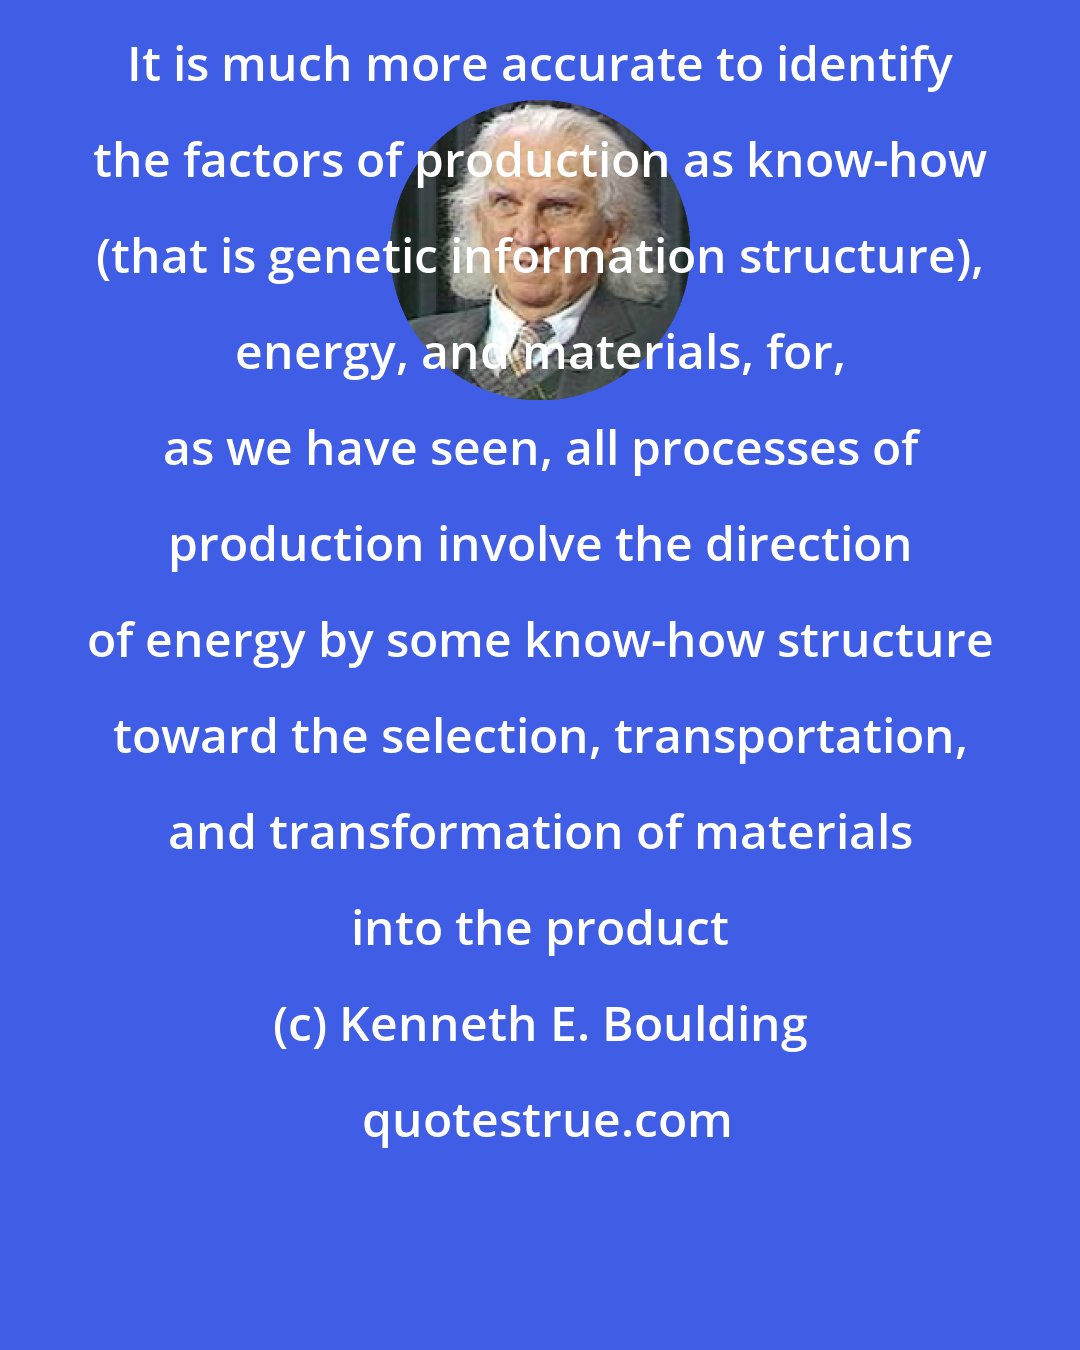 Kenneth E. Boulding: It is much more accurate to identify the factors of production as know-how (that is genetic information structure), energy, and materials, for, as we have seen, all processes of production involve the direction of energy by some know-how structure toward the selection, transportation, and transformation of materials into the product